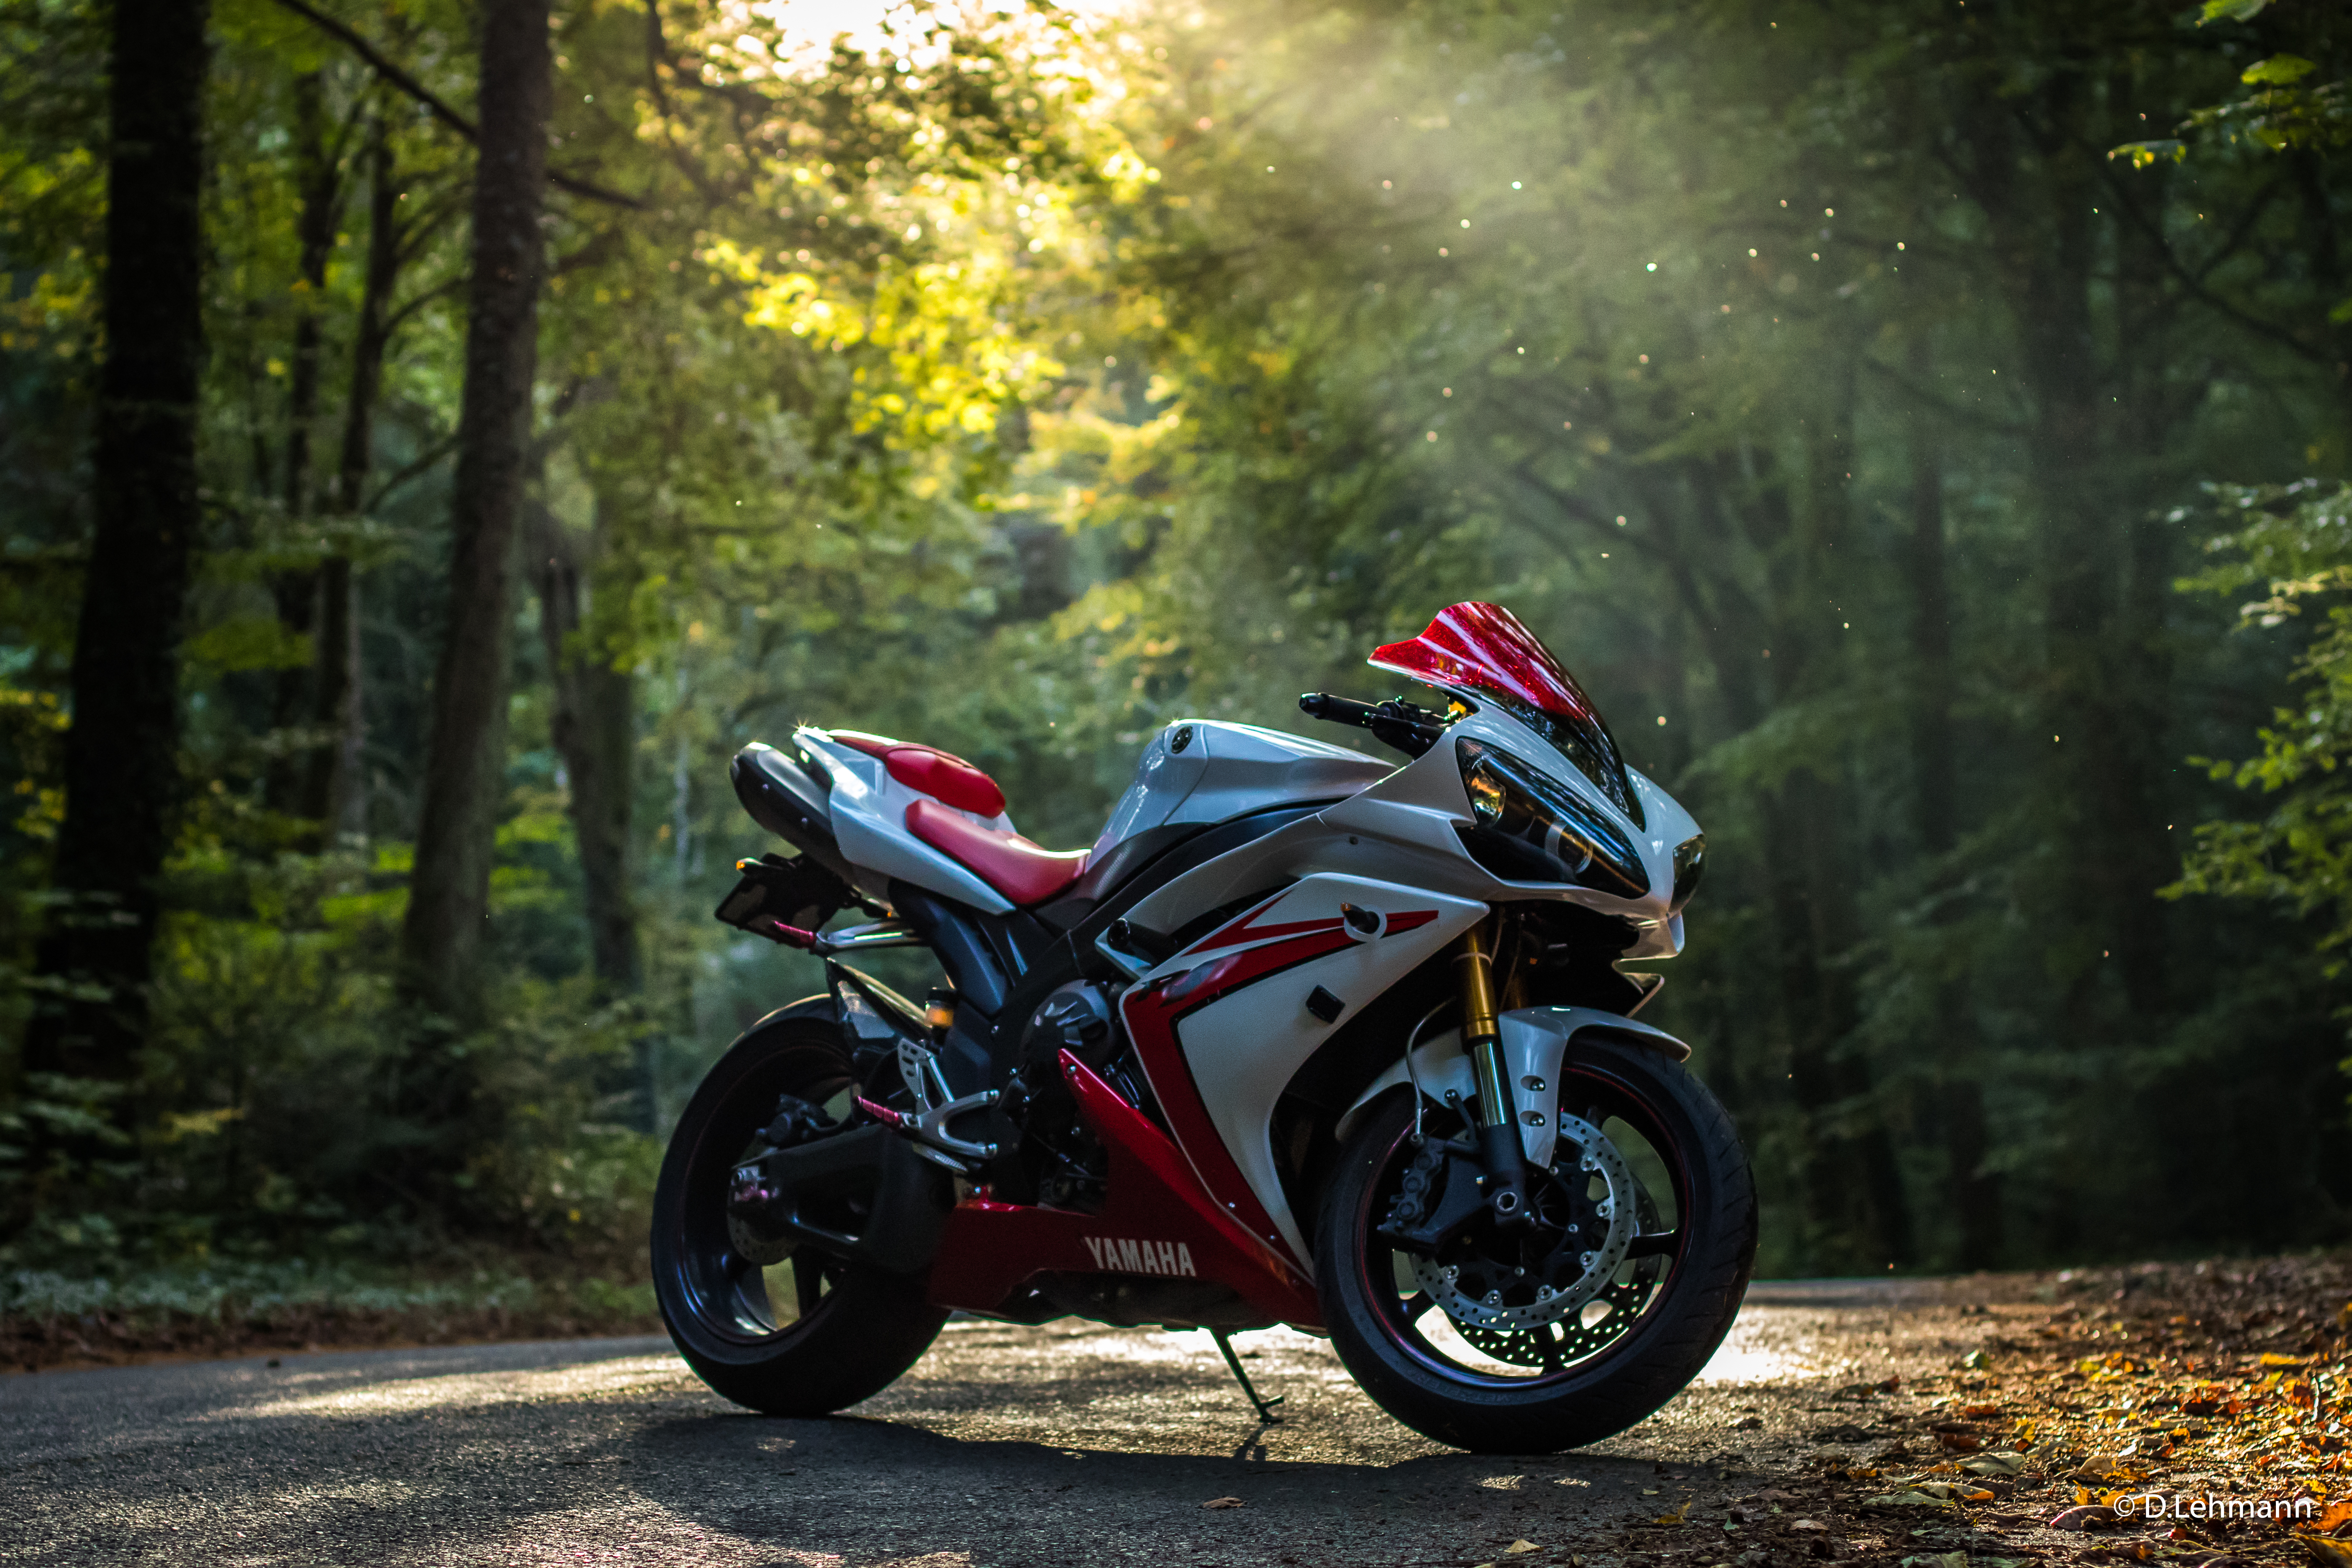 Download wallpaper 1350x2400 yamaha r1 red sportbike iphone 876s6  for parallax hd background